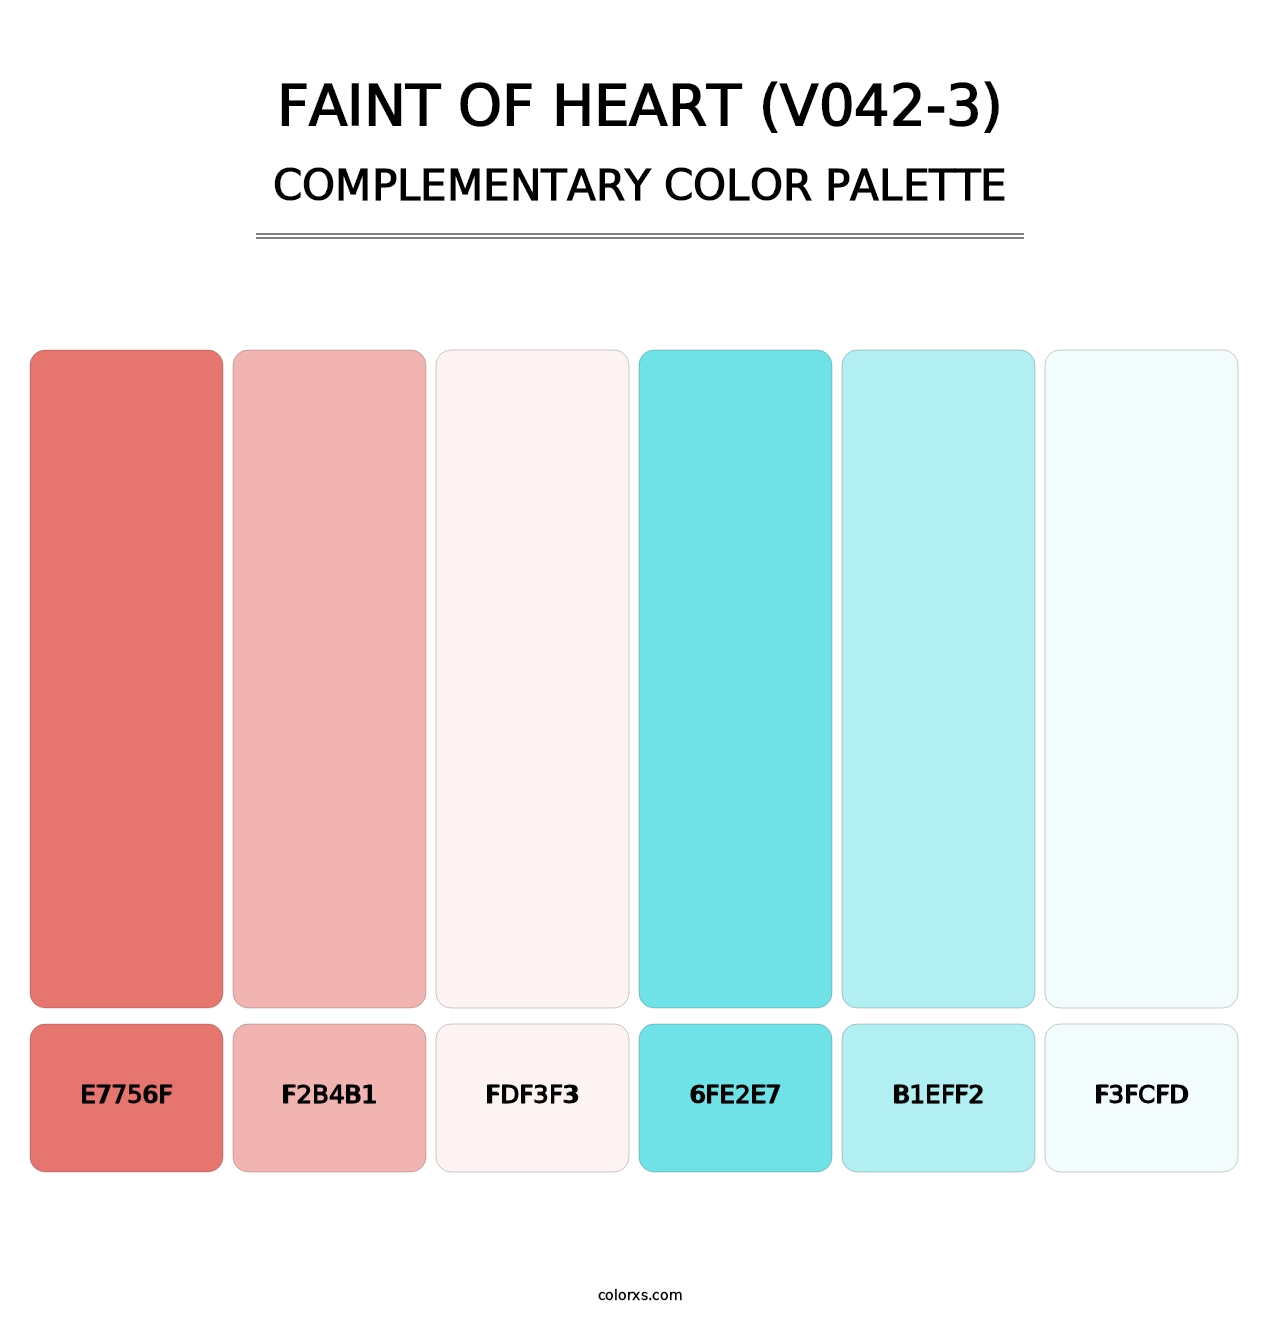 Faint of Heart (V042-3) - Complementary Color Palette